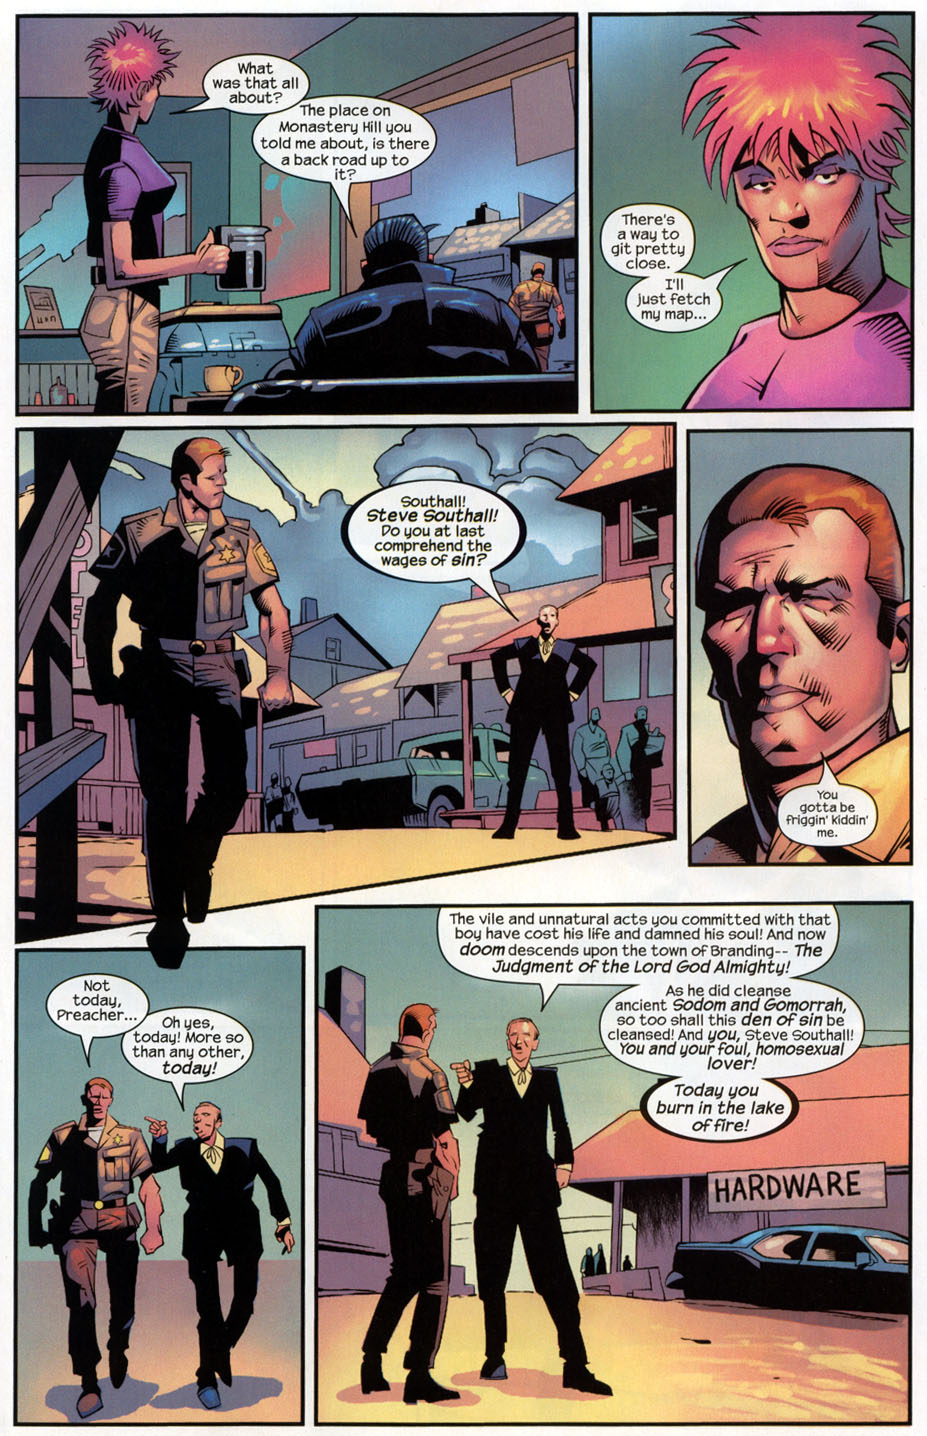 The Punisher (2001) issue 30 - Streets of Laredo #03 - Page 7